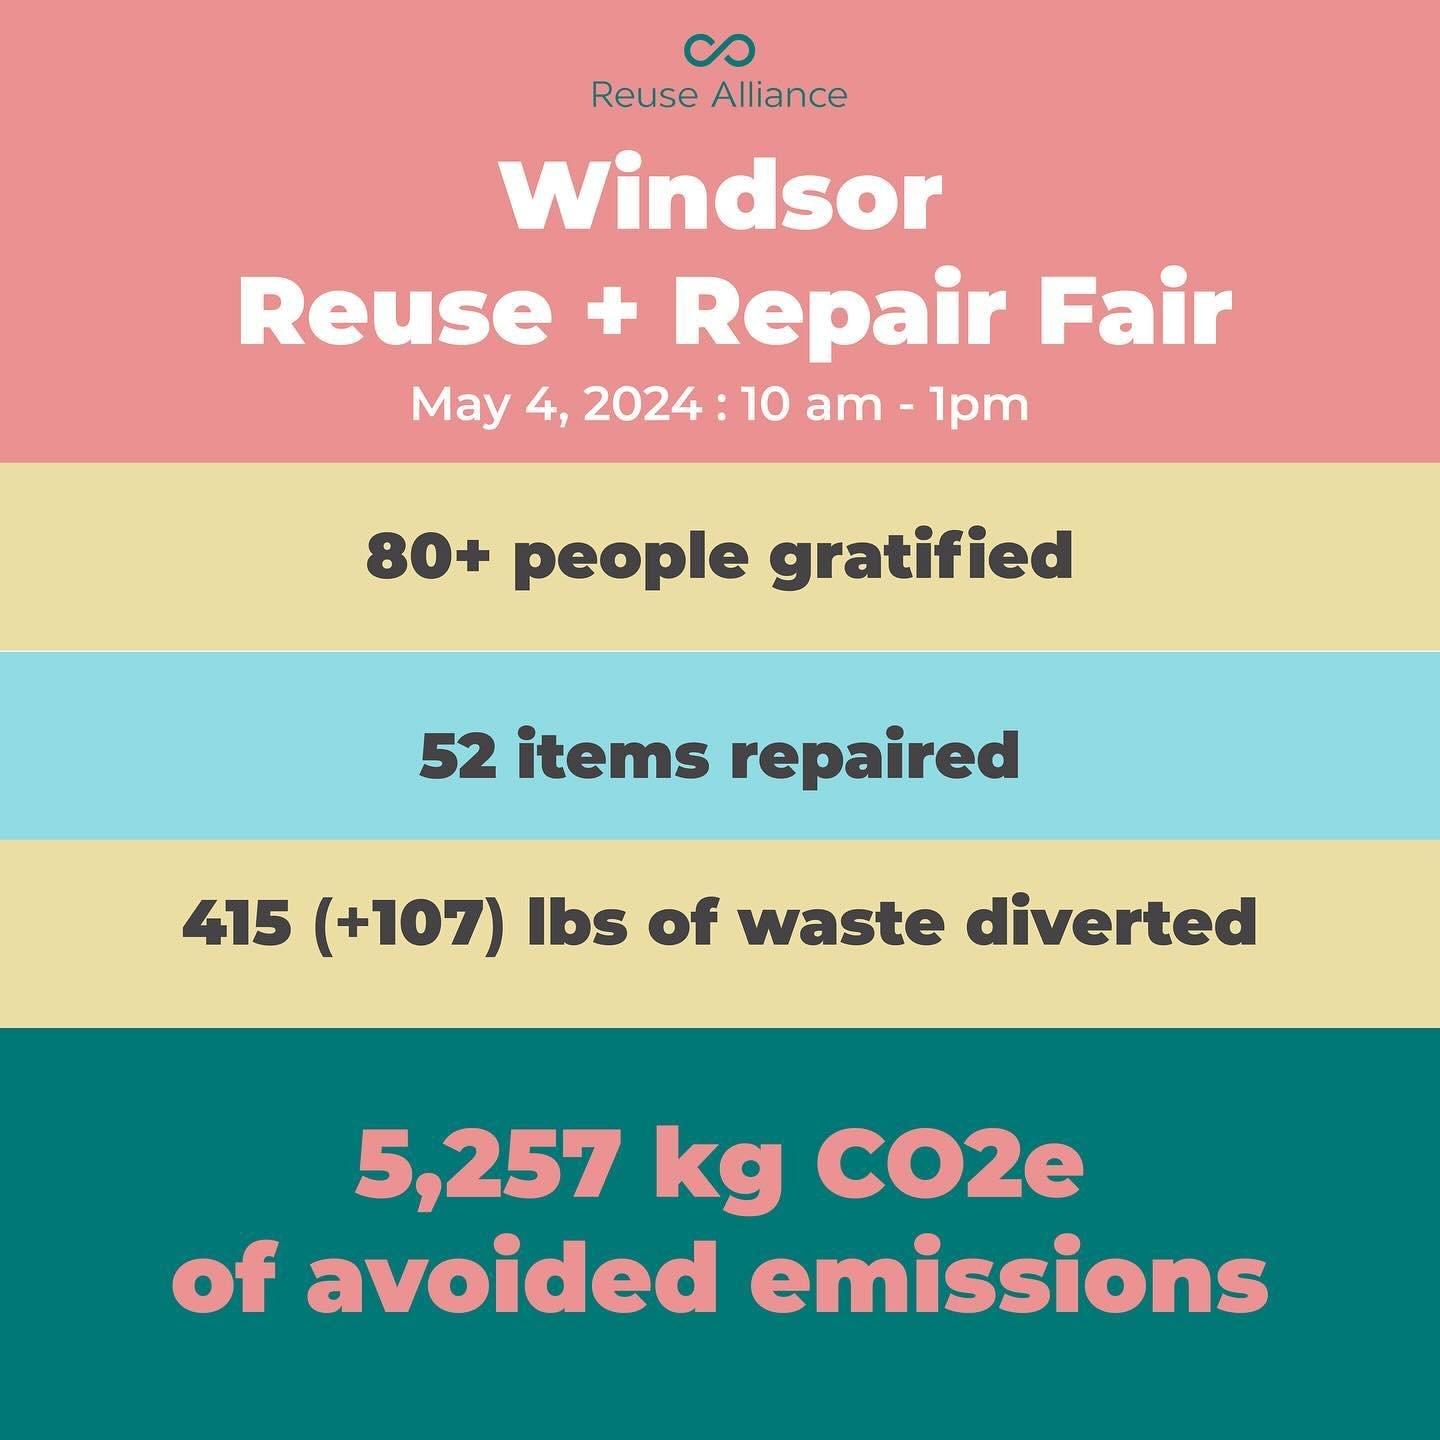 We had a great time in Windsor on Saturday repairing things&hellip;

swapping 107 pounds of clothing (thanks @ucpnbfamily !)&hellip;

collecting e-waste (thanks @conservationcorpsnorthbay !)&hellip;

sharing about refilling (thanks @socotradingcompan